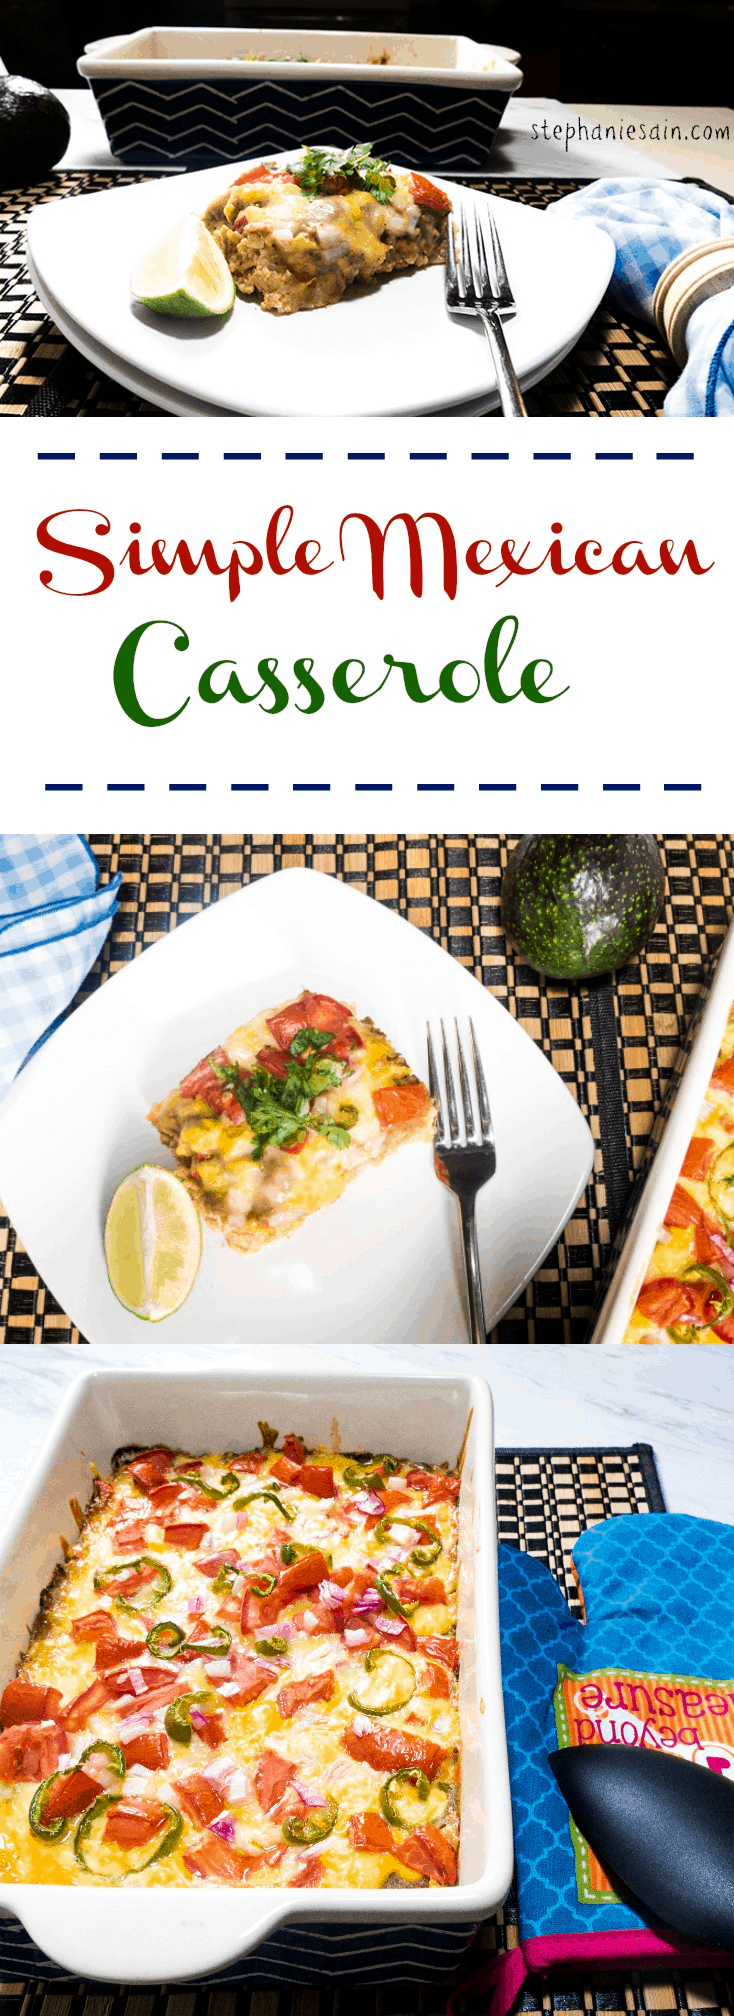 Simple Mexican Casserole is an easy to prepare dinner that is tasty, vegetarian, and gluten free